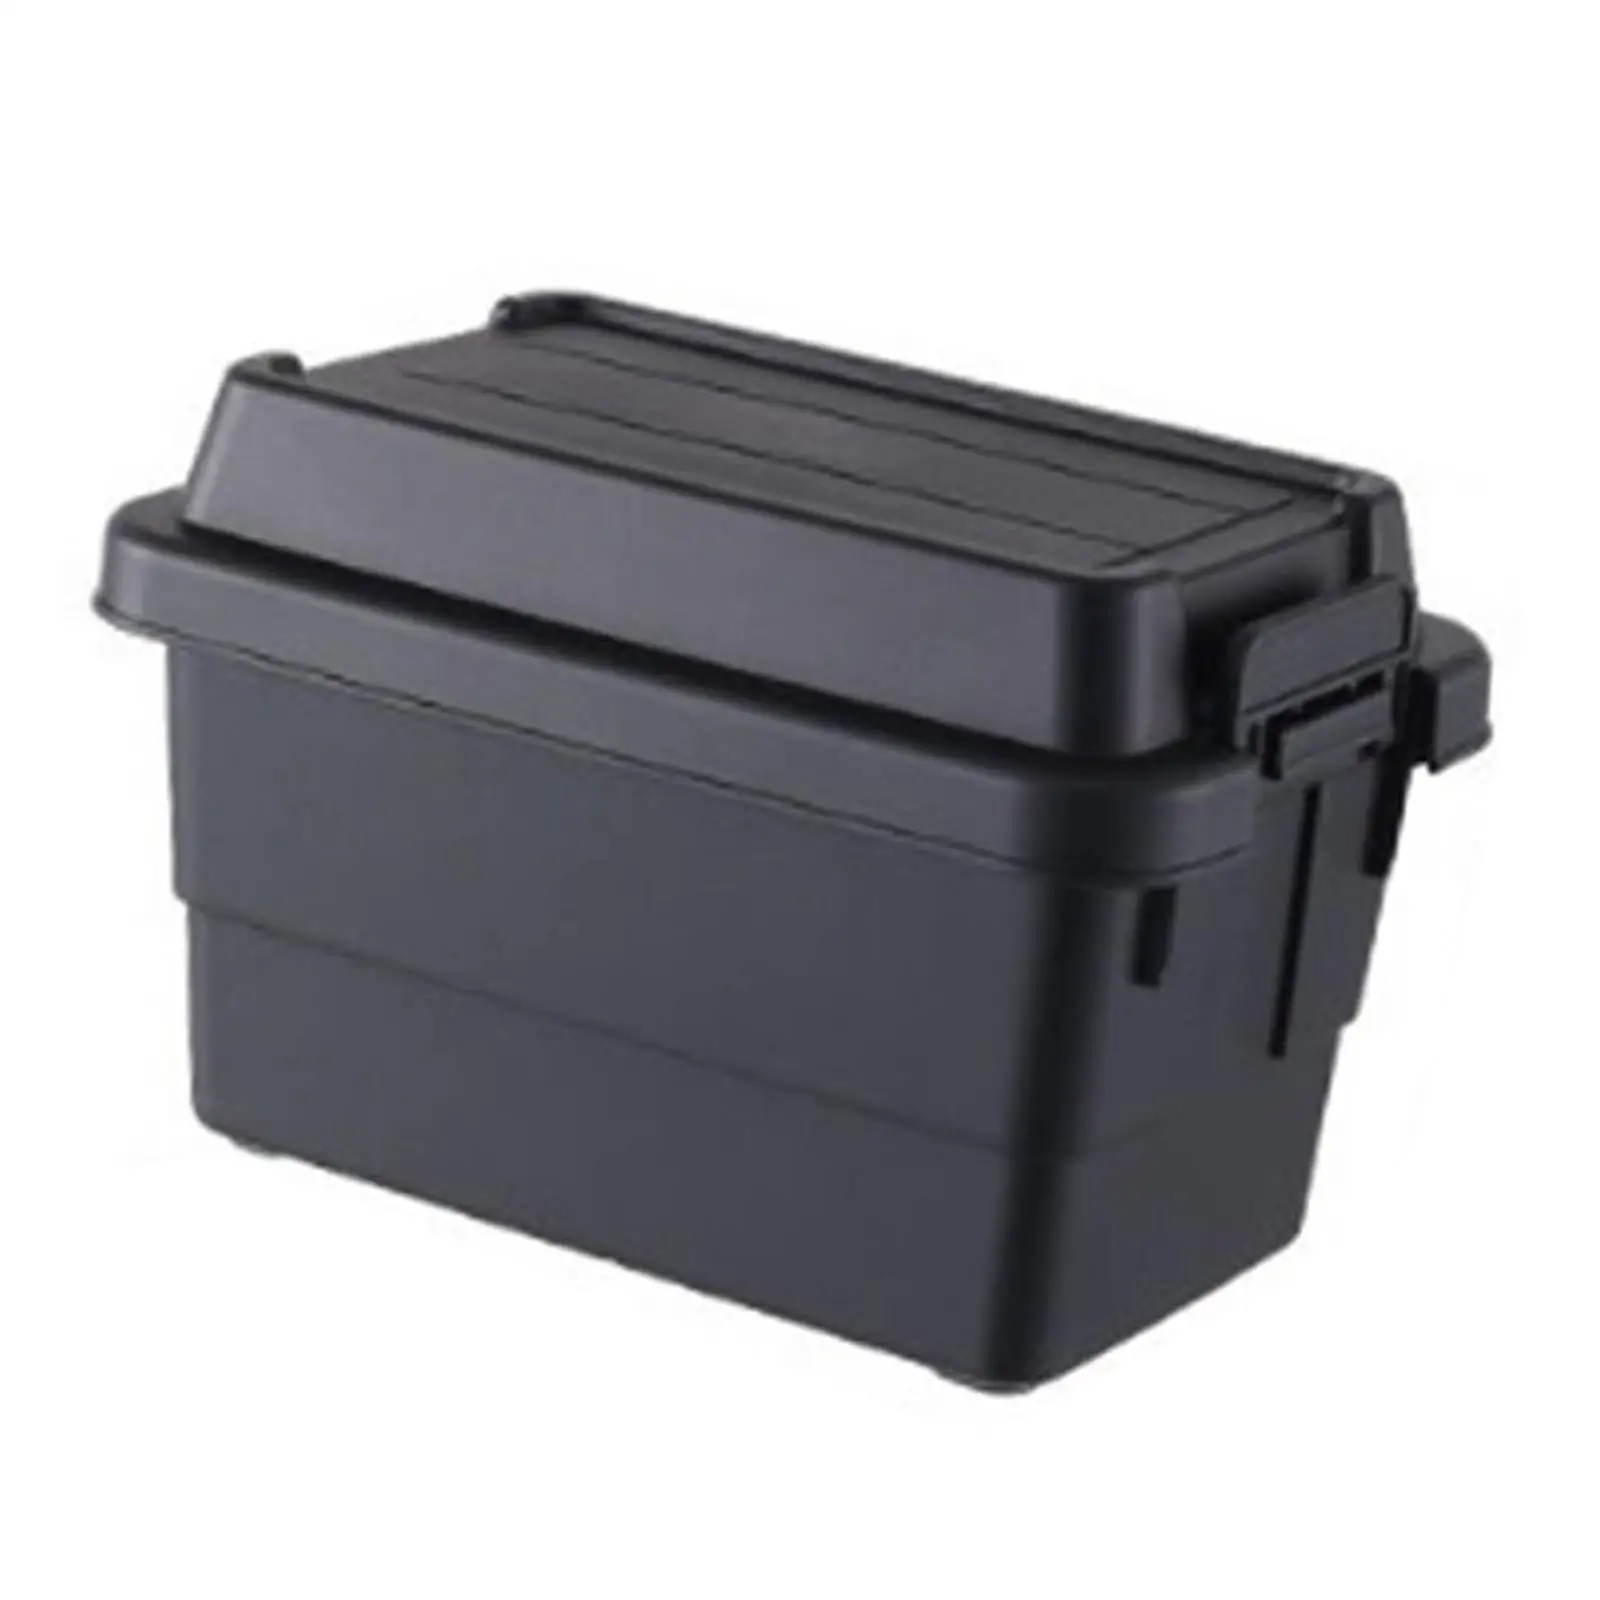 Camping Storage Box Durable Storage Bin with Latching Lid Small Storage